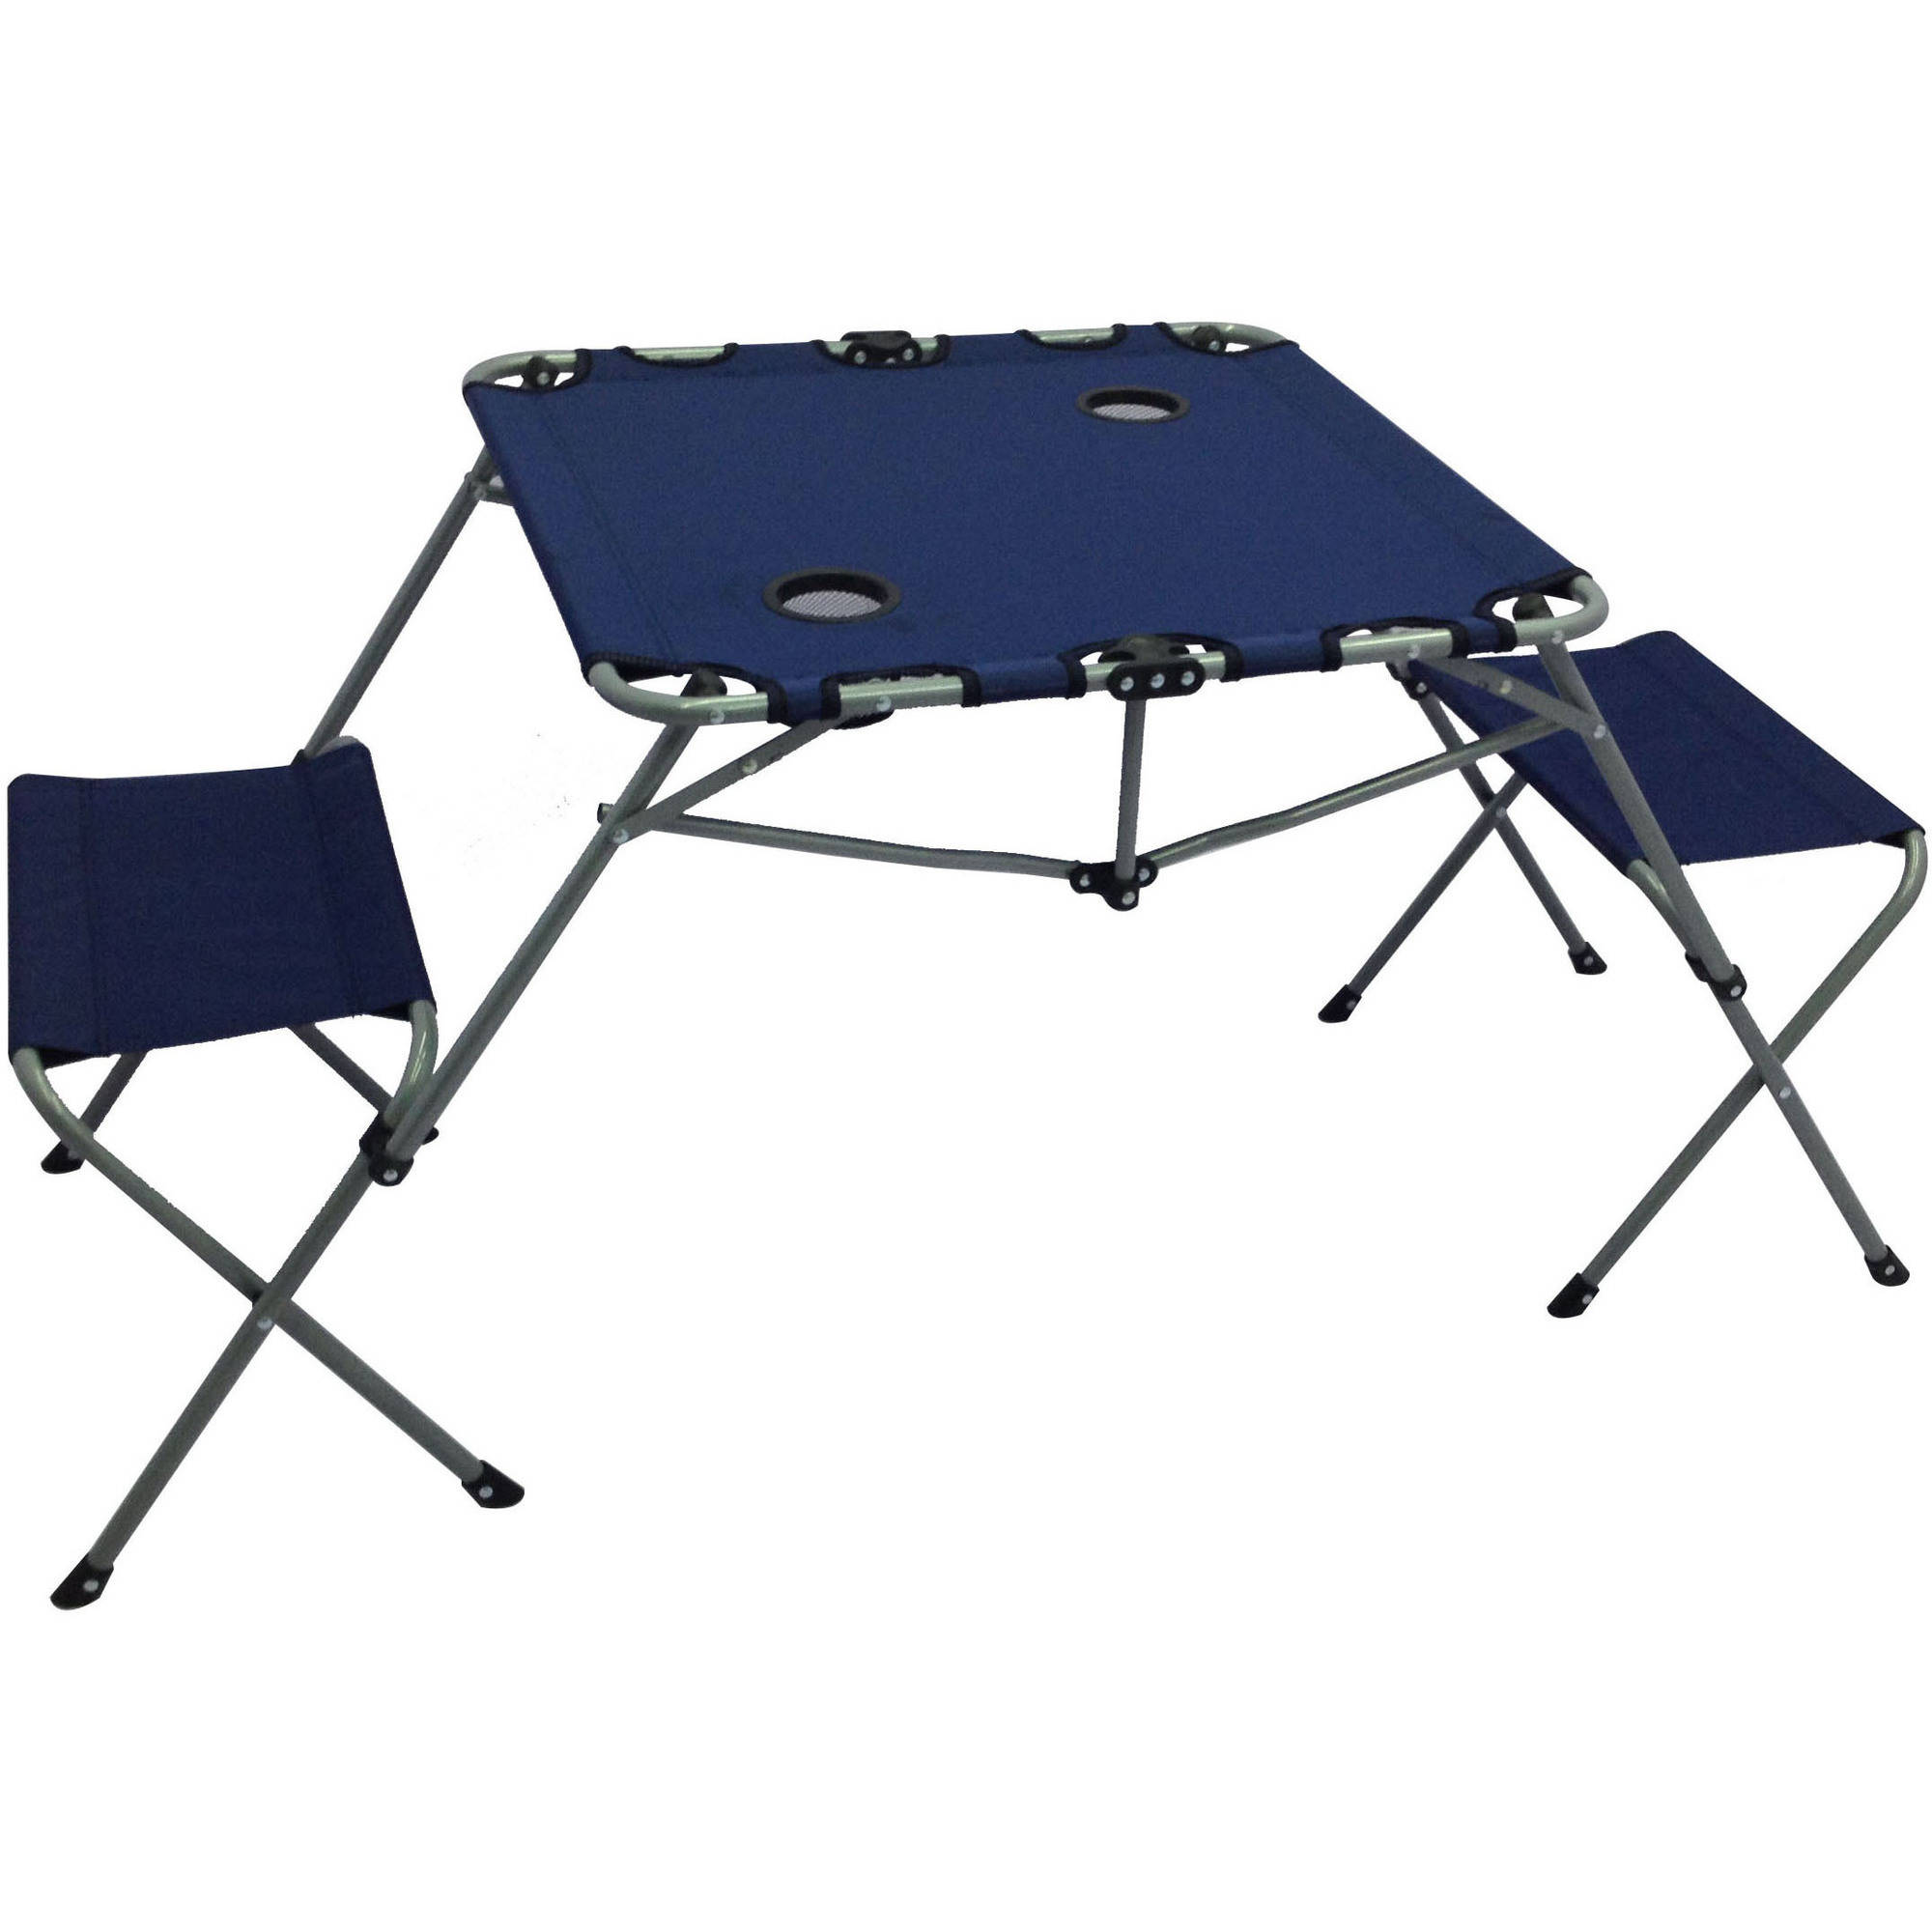 Ozark Trail 2-In-1 table set for $16